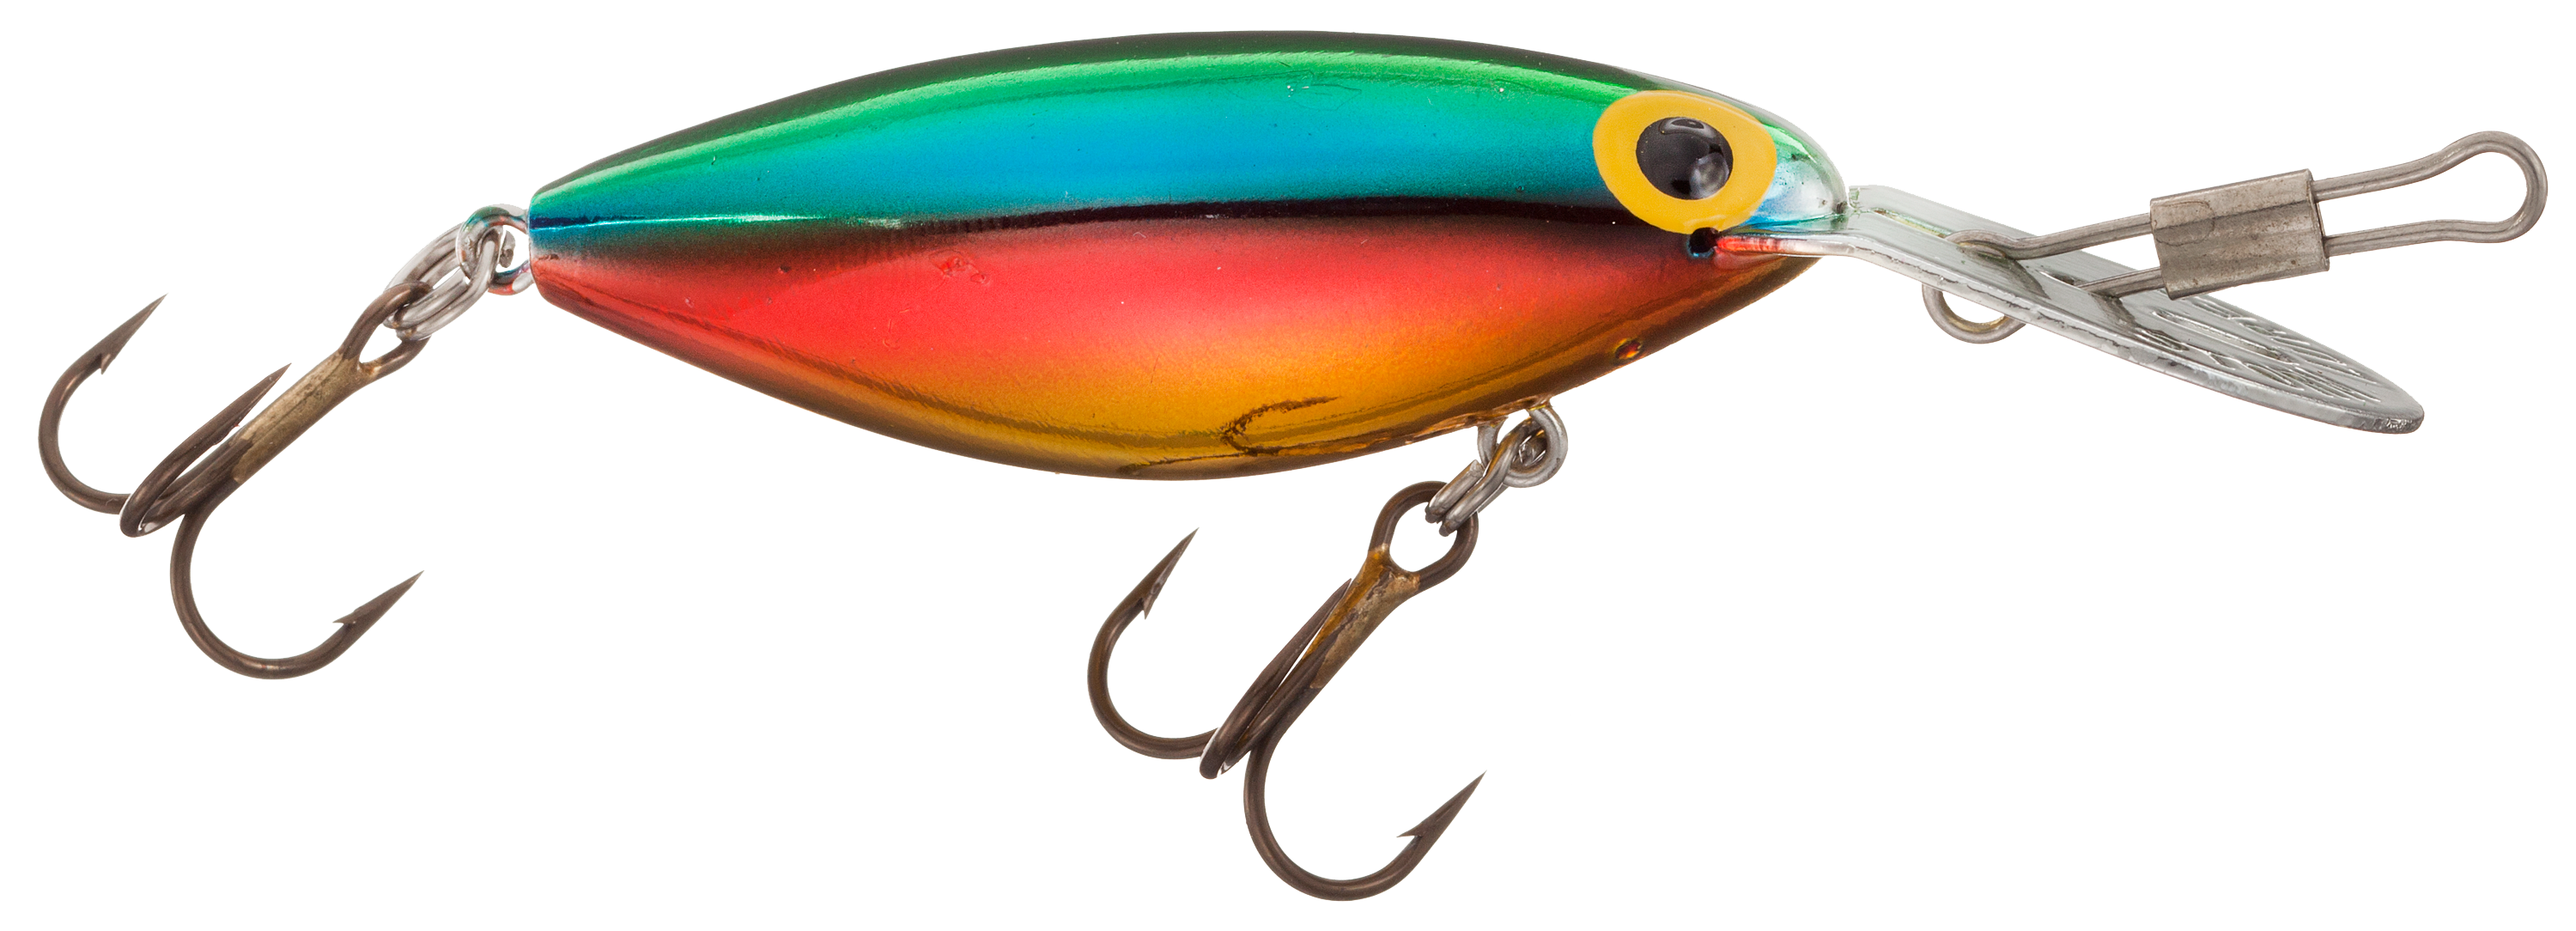 Storm Original Hot 'N Tot Lure - 2.5-in - Running Depth of 7-ft to 20-ft -  Gold and Fluo Red AH109